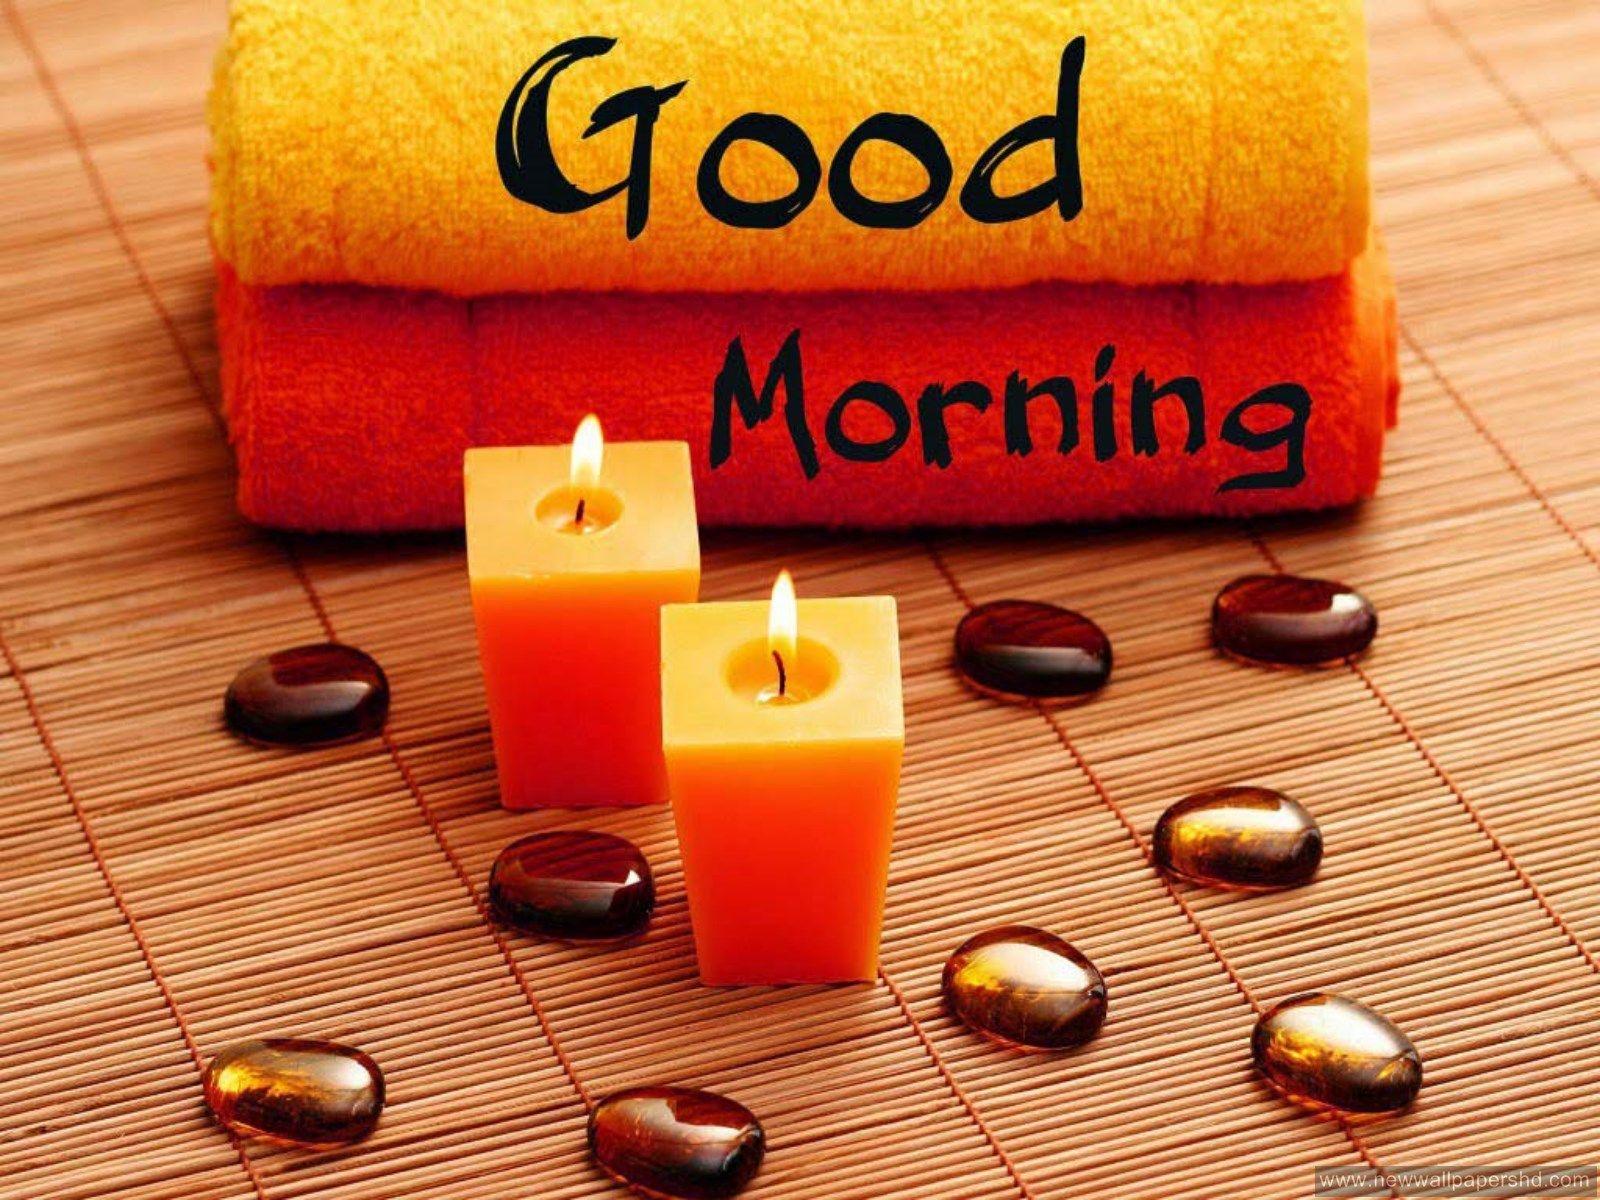 Download Good morning best wish wallpaper night wallpaper for your mobile cell phone